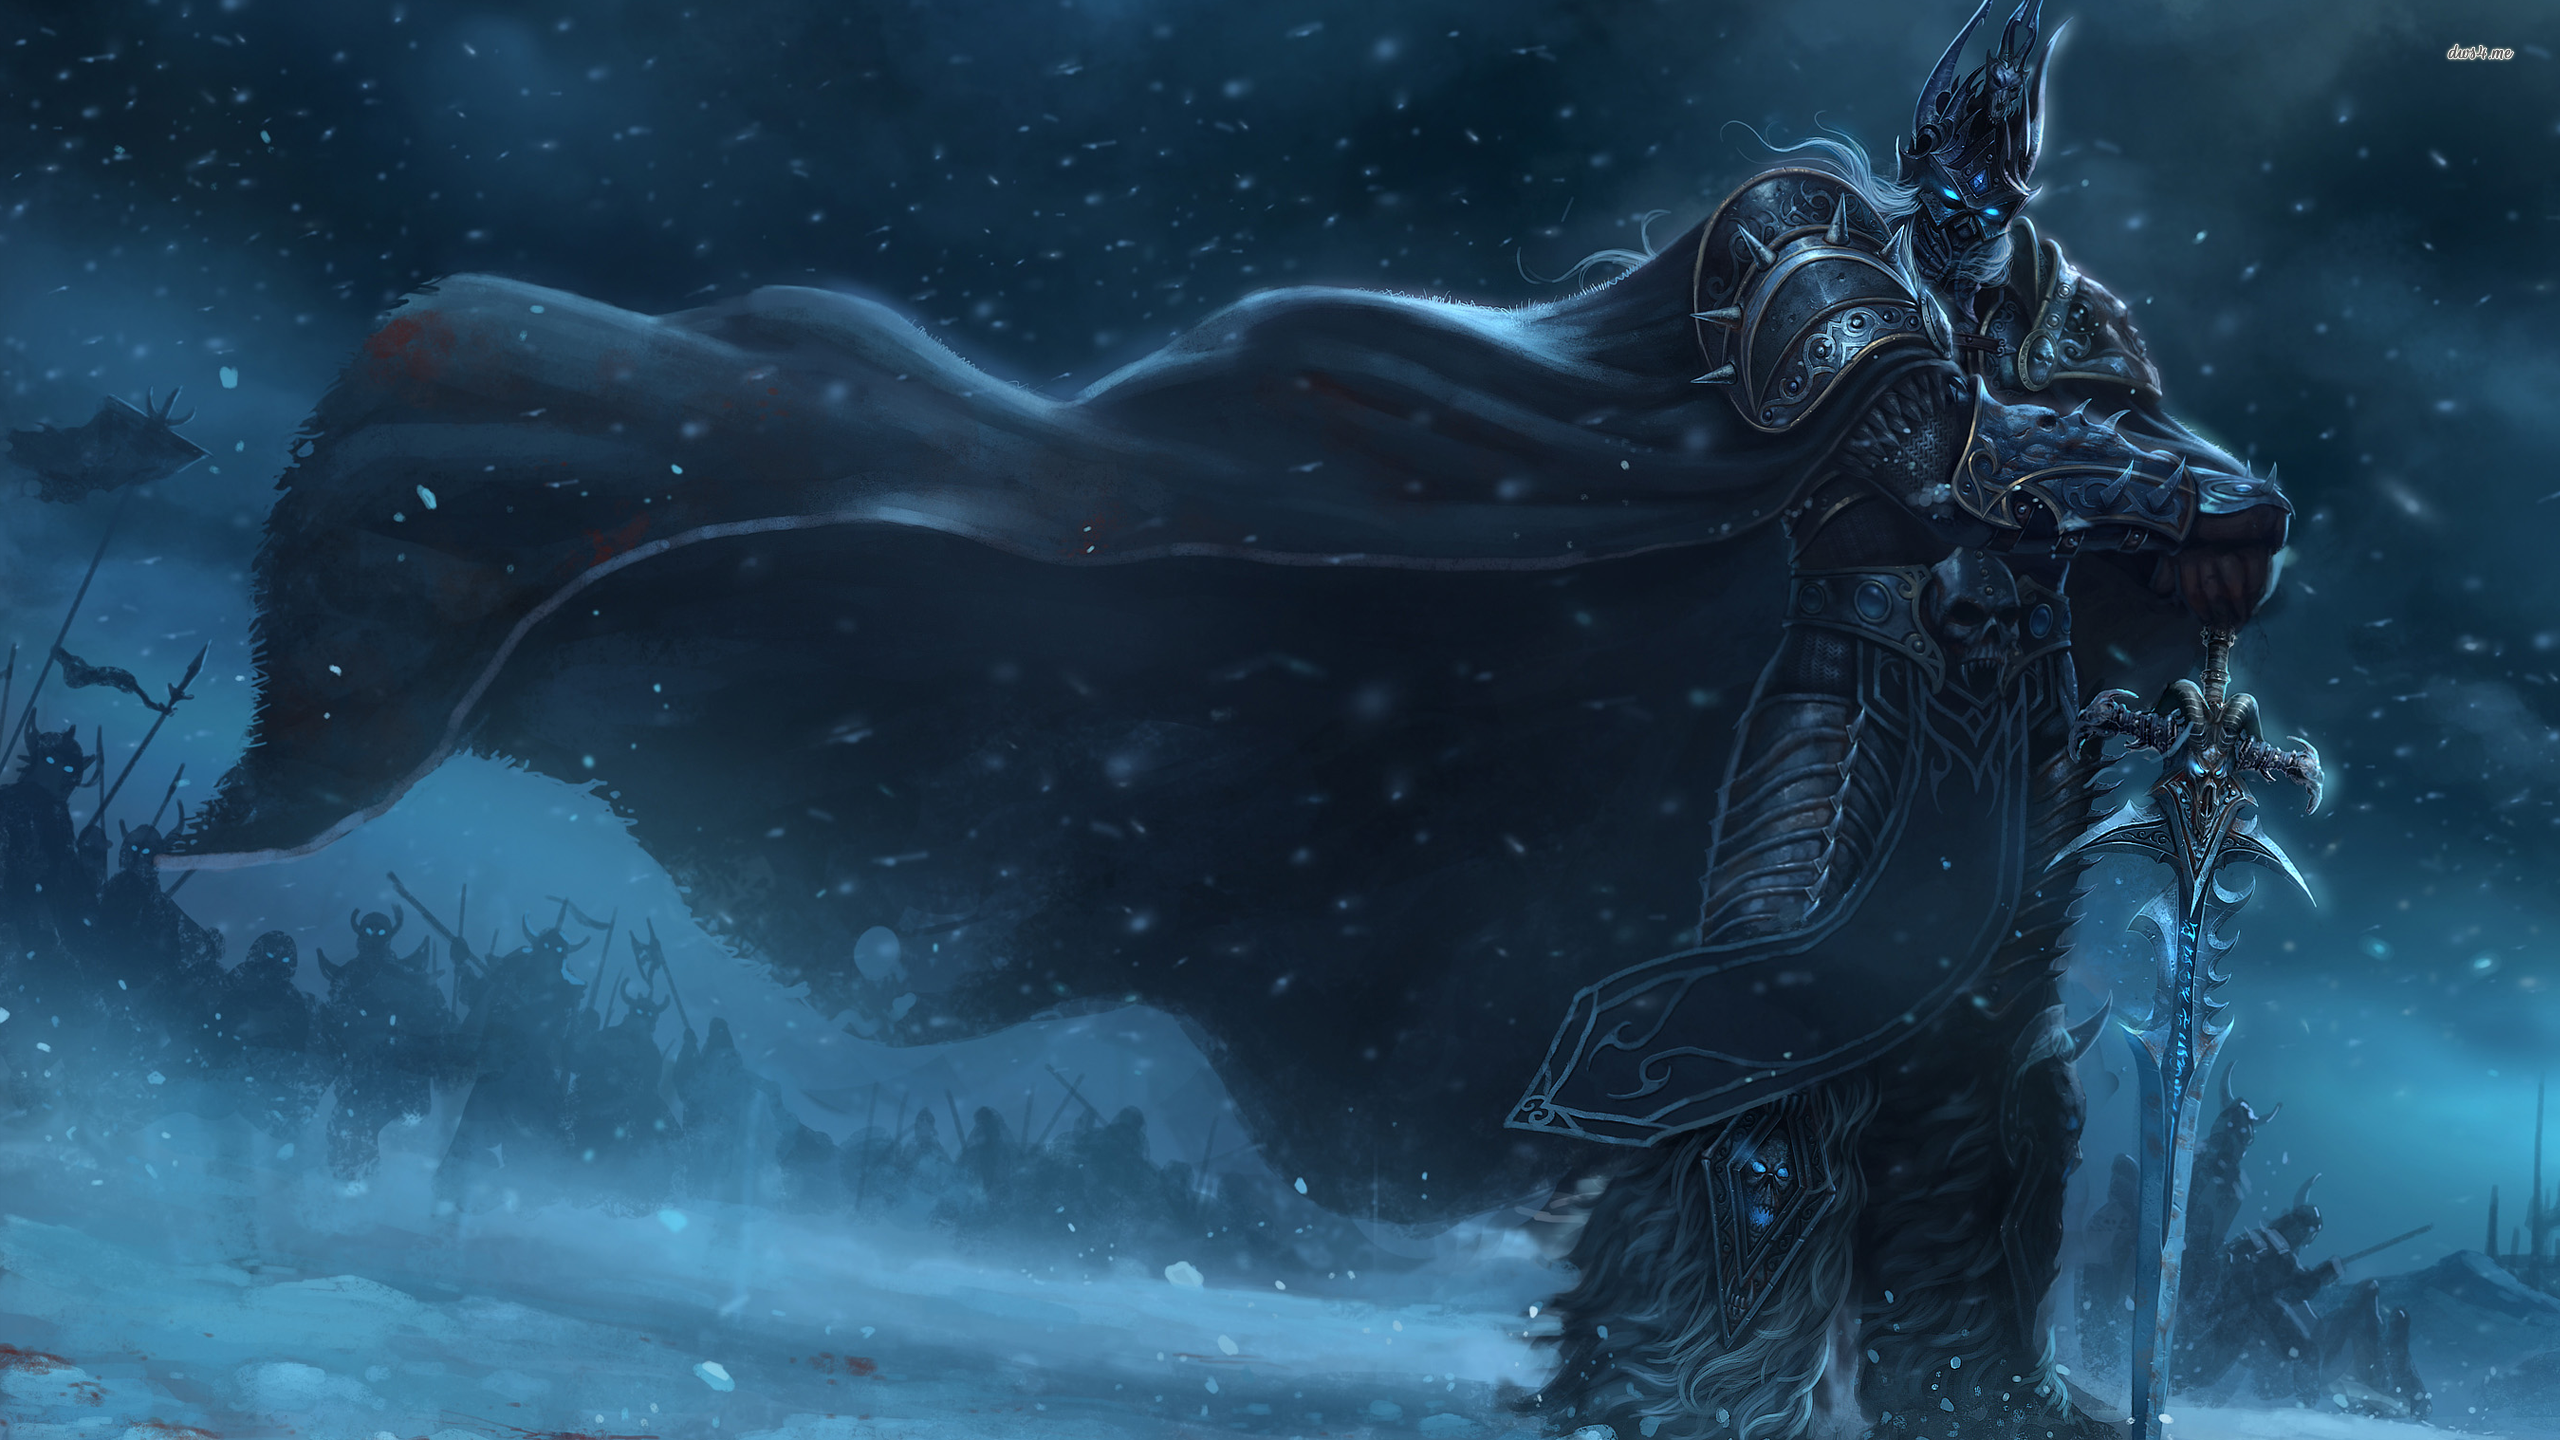 The Lich King - World of Warcraft wallpaper - Game wallpapers - #14952